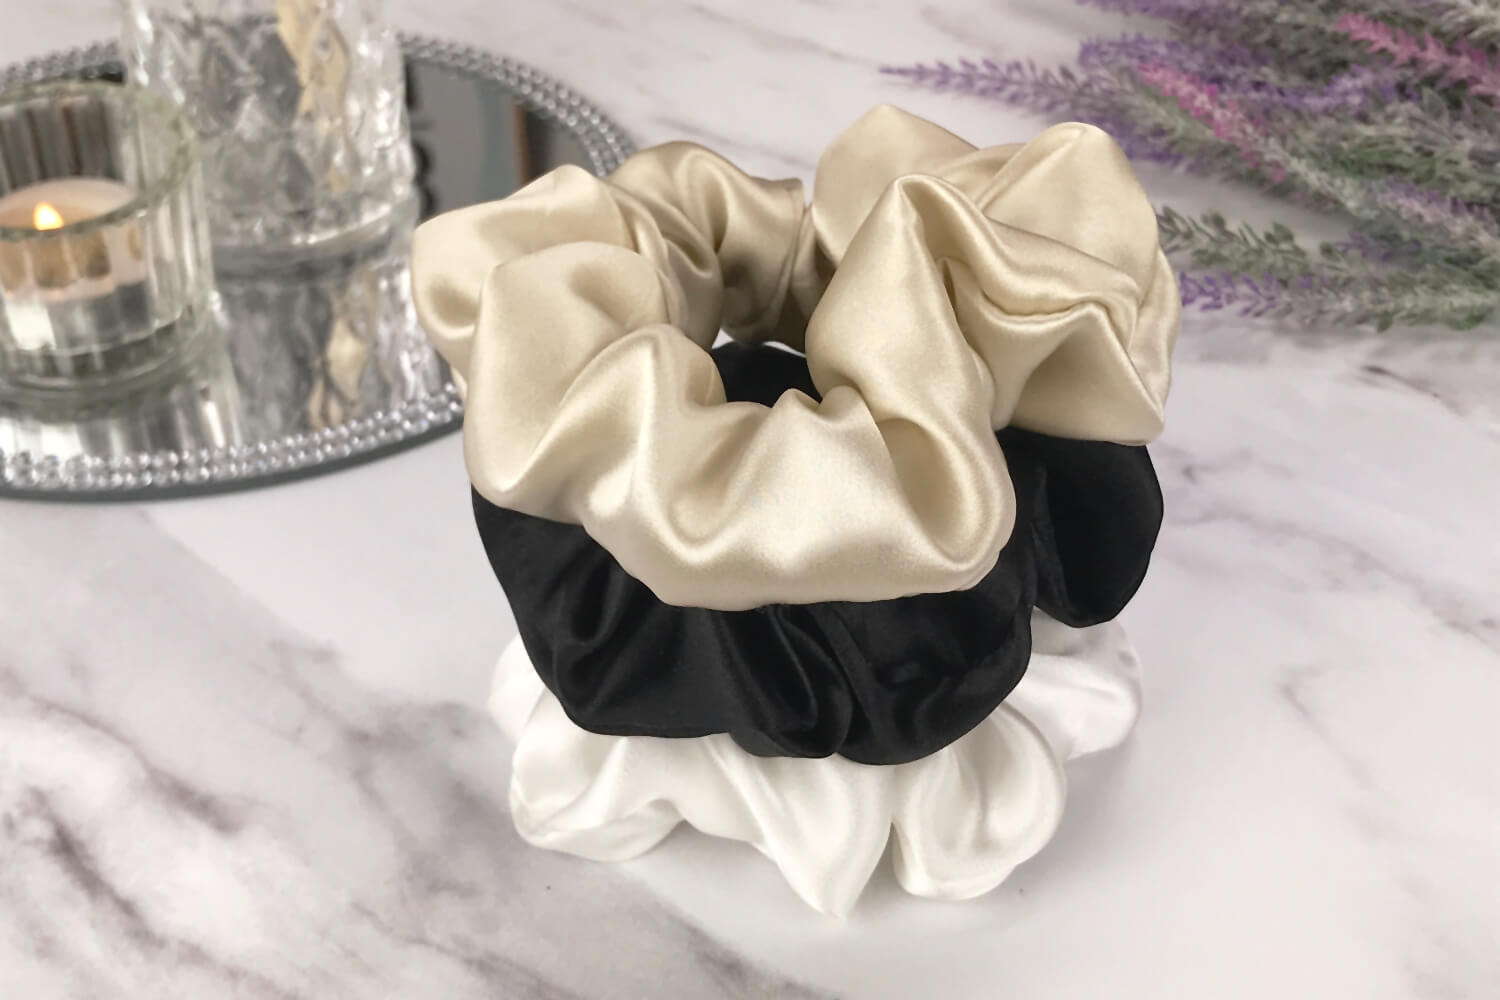 Celestial Silk taupe ivory and black silk scrunchies stacked on marble counter with lavender plant and a candle in the background